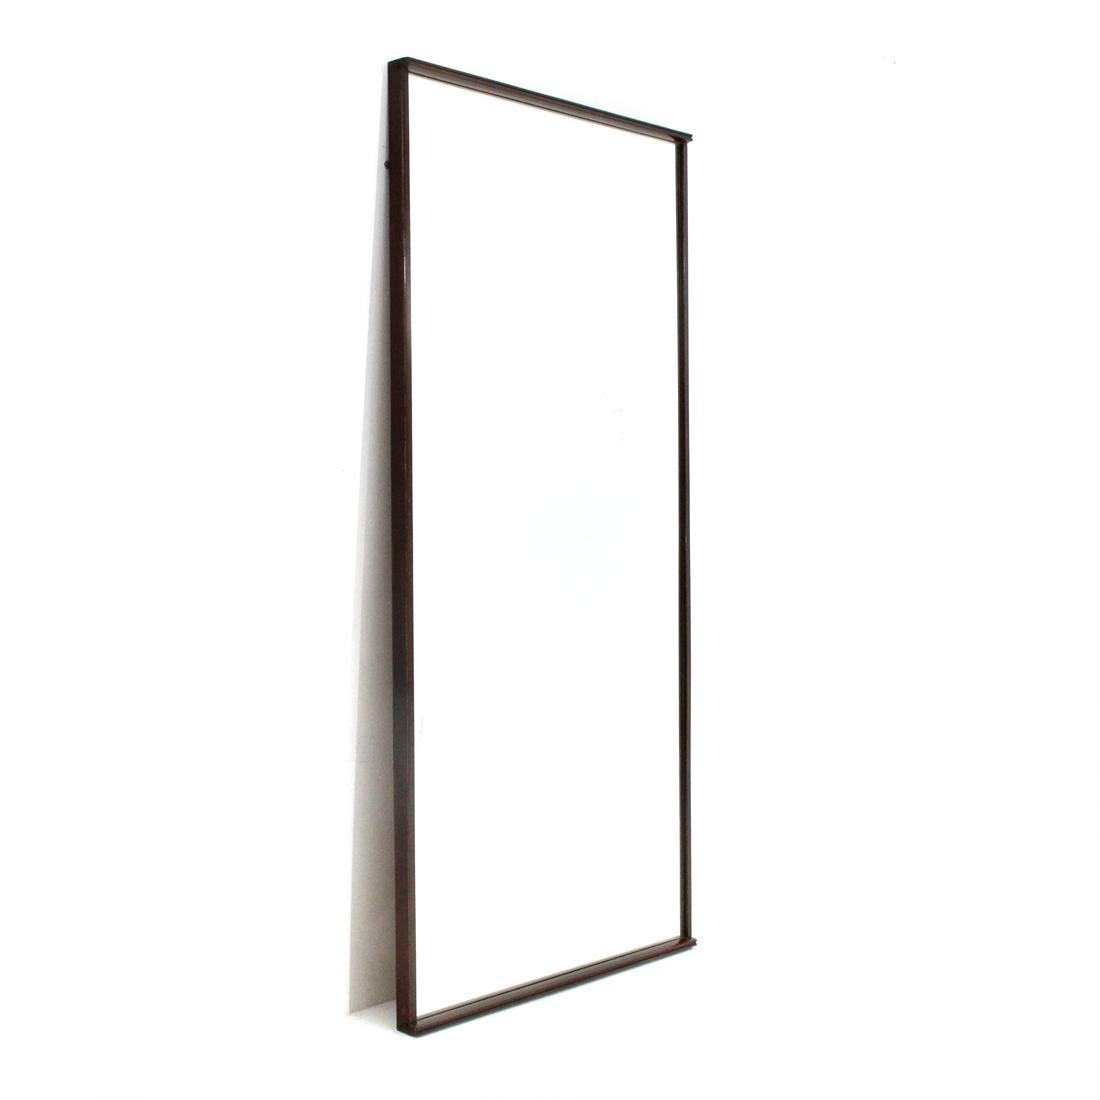 Italian manufacture mirror produced in the 1950s.
Wooden structure and frame.
Rectangular mirror.
Good general condition, some signs due to normal use of time.

Dimensions: Length 173 cm, depth 6 cm, height 82 cm.